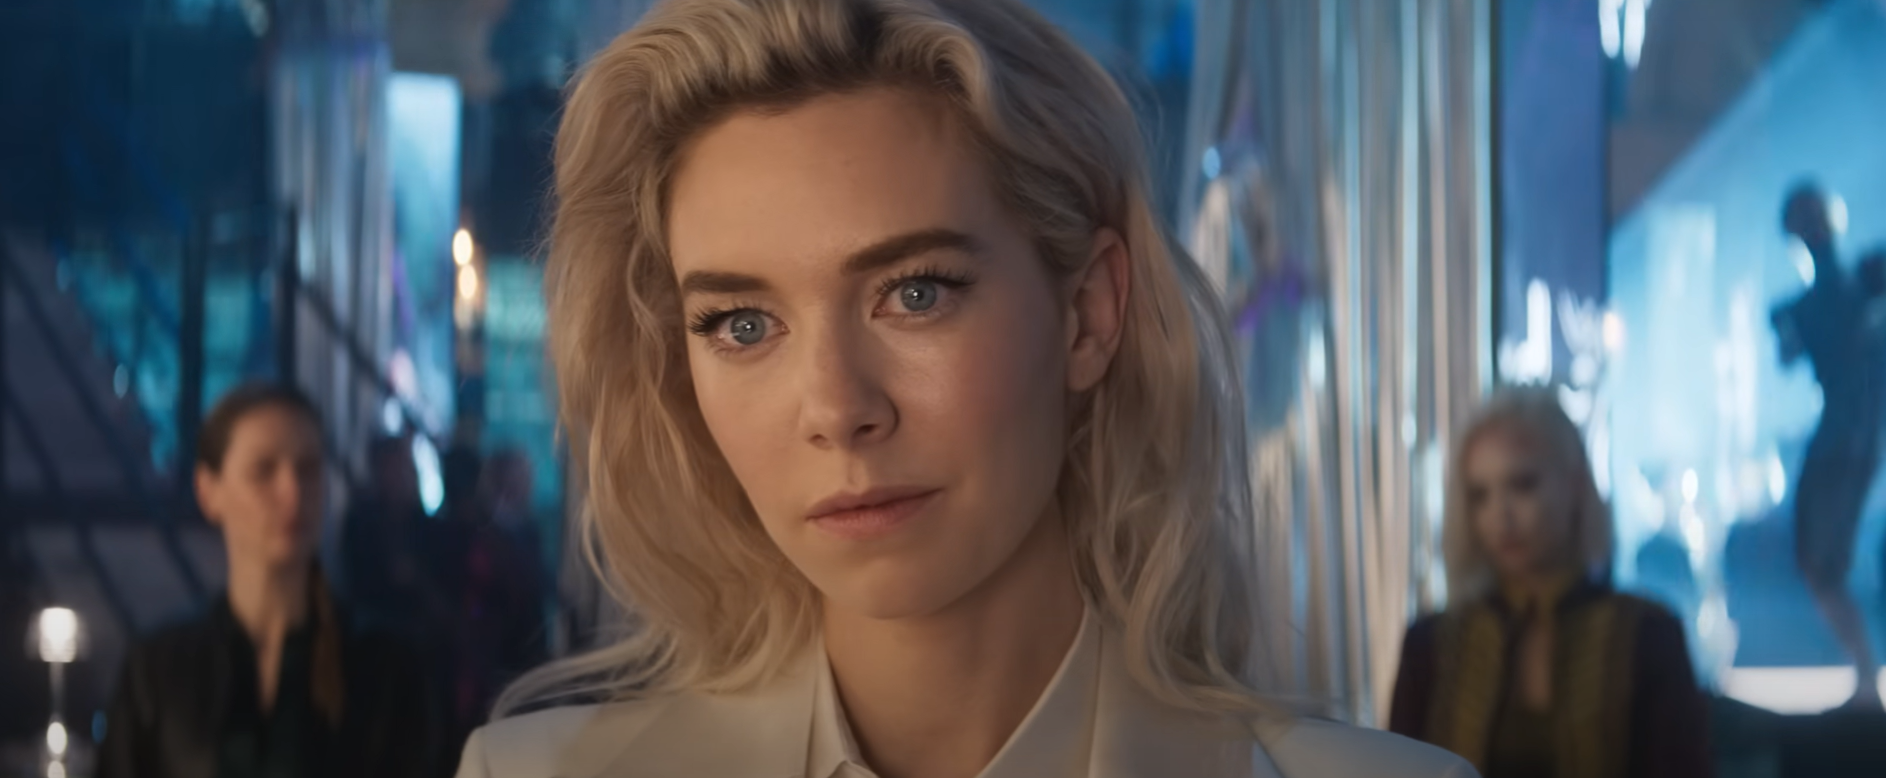 Vanessa Kirby - Mission Impossible 7 ©Paramount Pictures